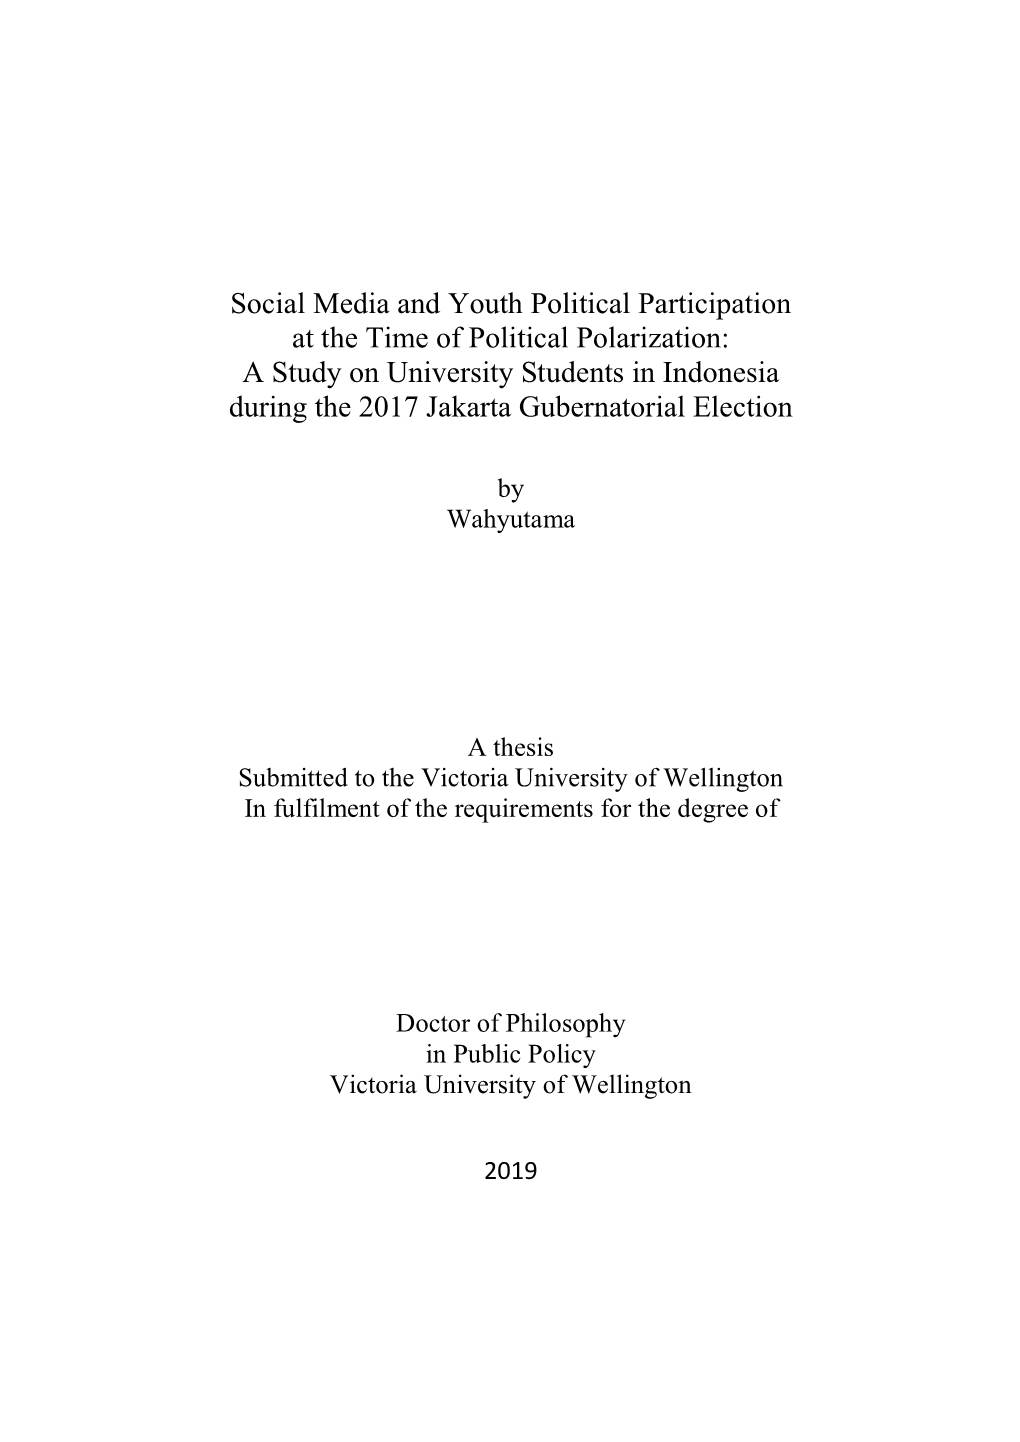 Social Media and Youth Political Participation at the Time of Political